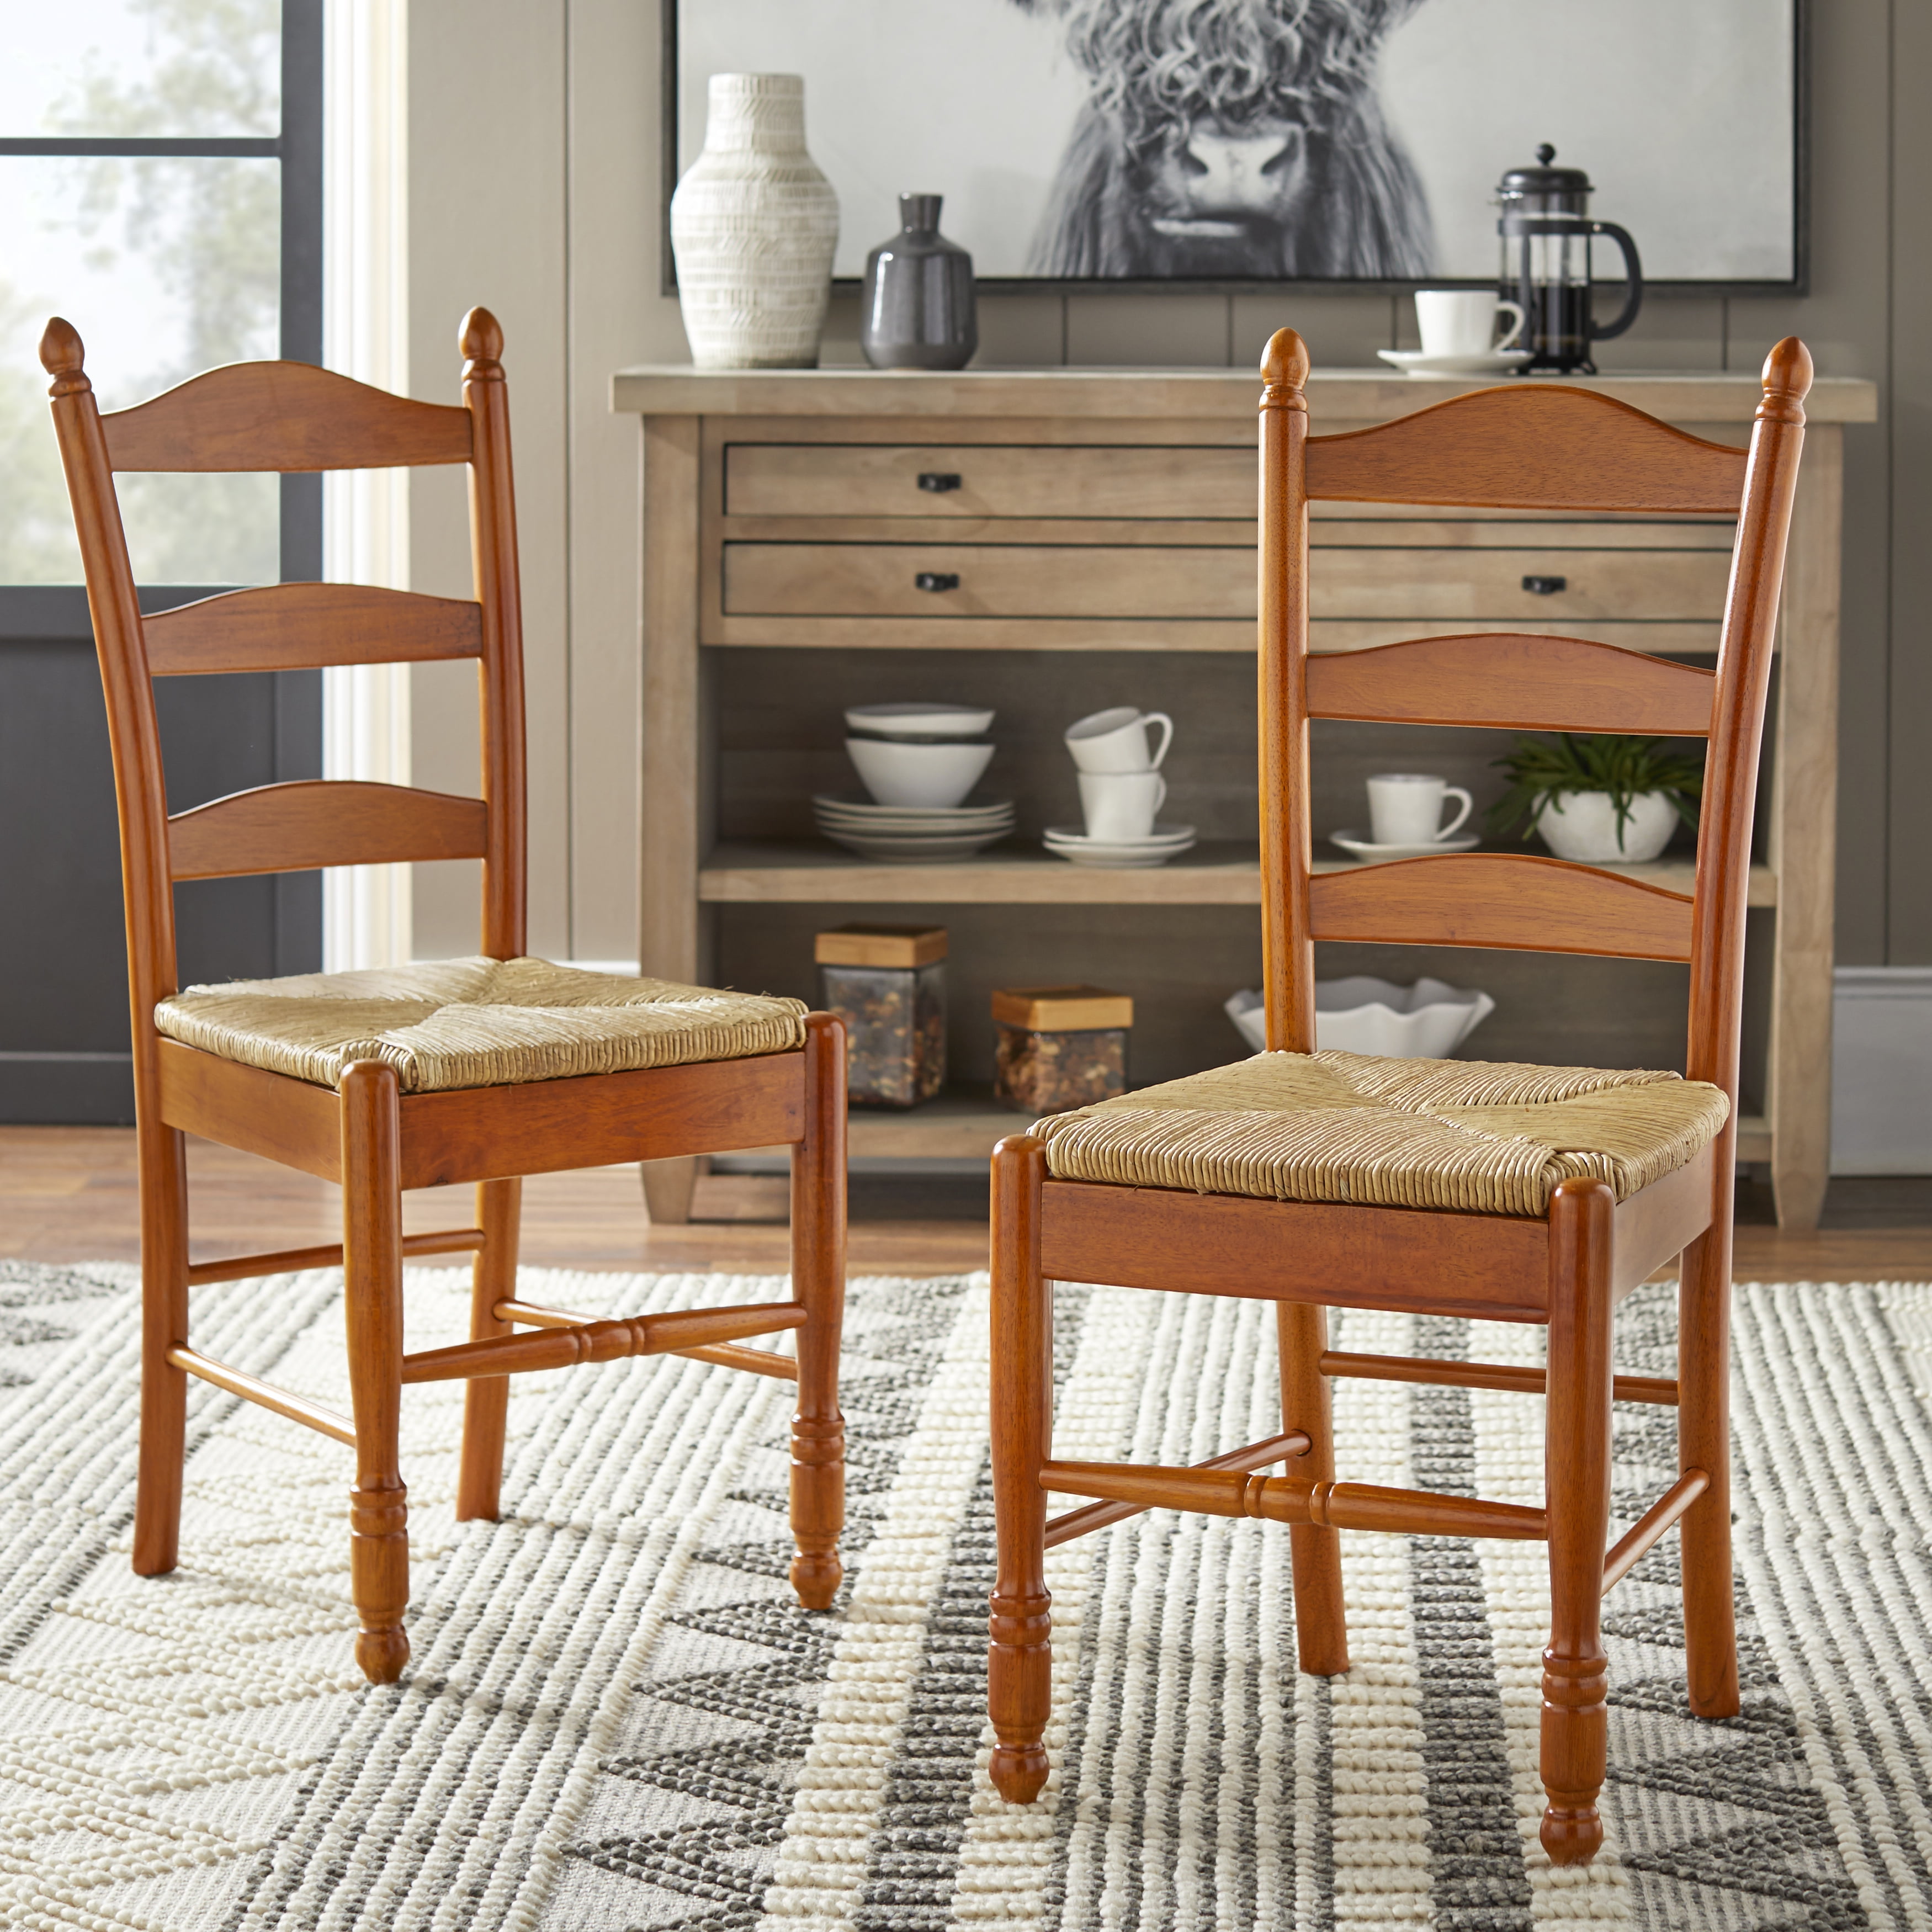 Ladder Back Rush Seat Chairs - Set of 2, Multiple Colors - Walmart.com